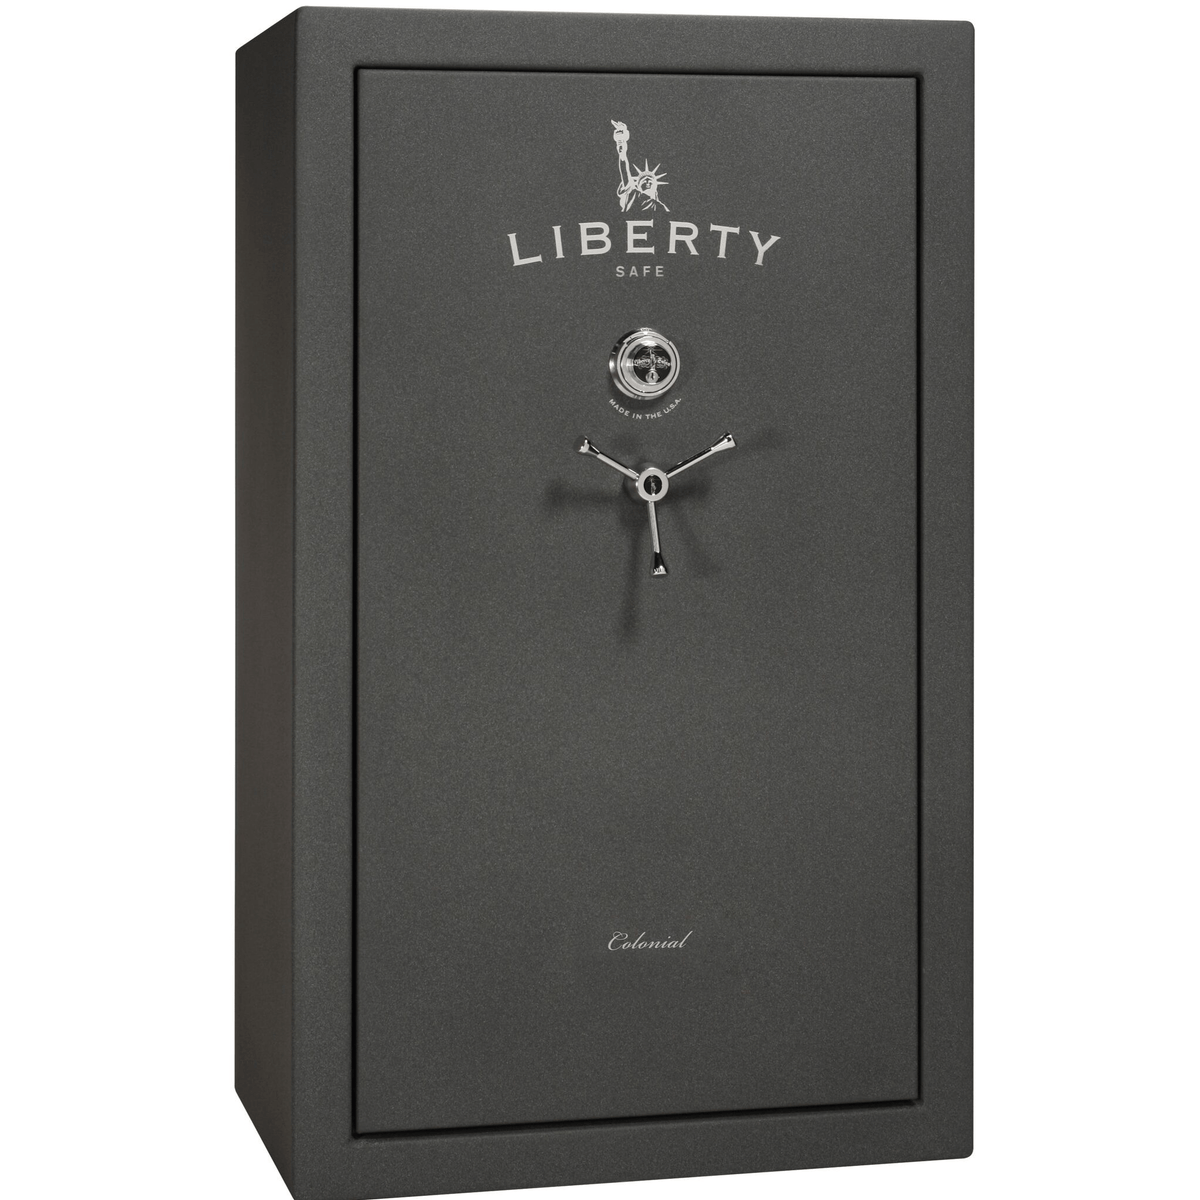 Liberty Colonial 30 Safe in Textured Granite, Open.